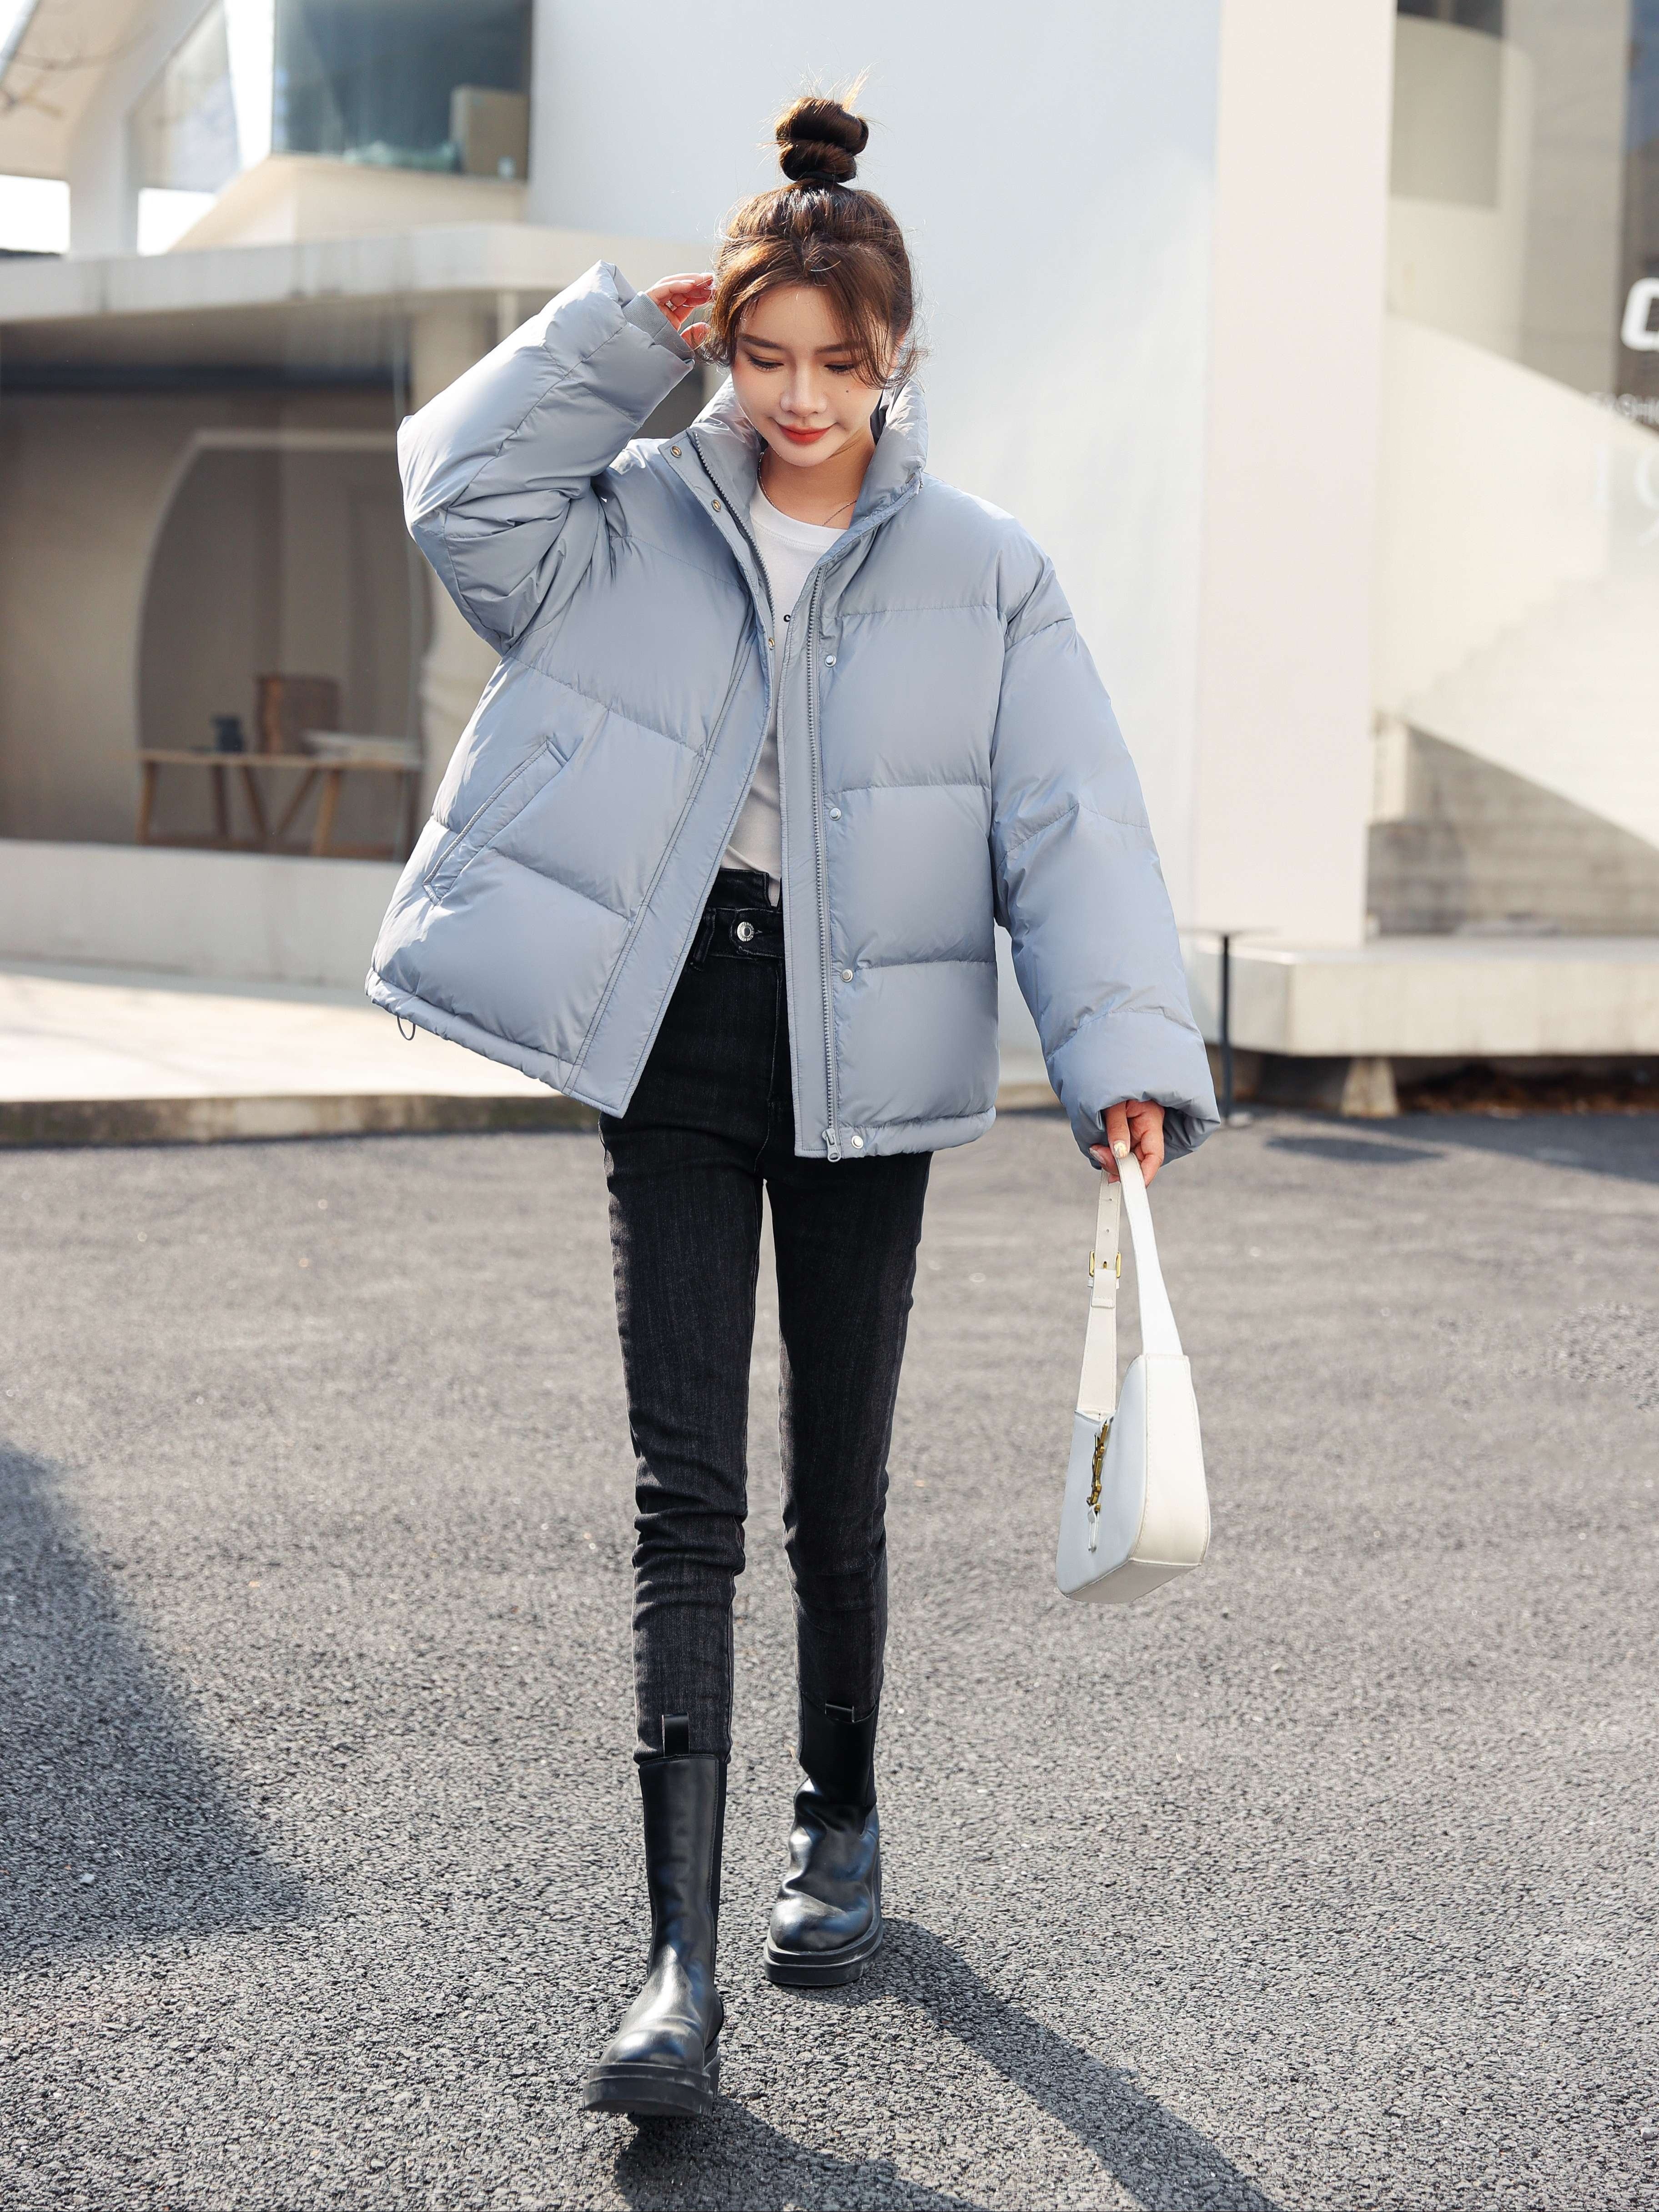 TWDYC Winter Clothes Women Parkas Jacket Fashion Casual Solid